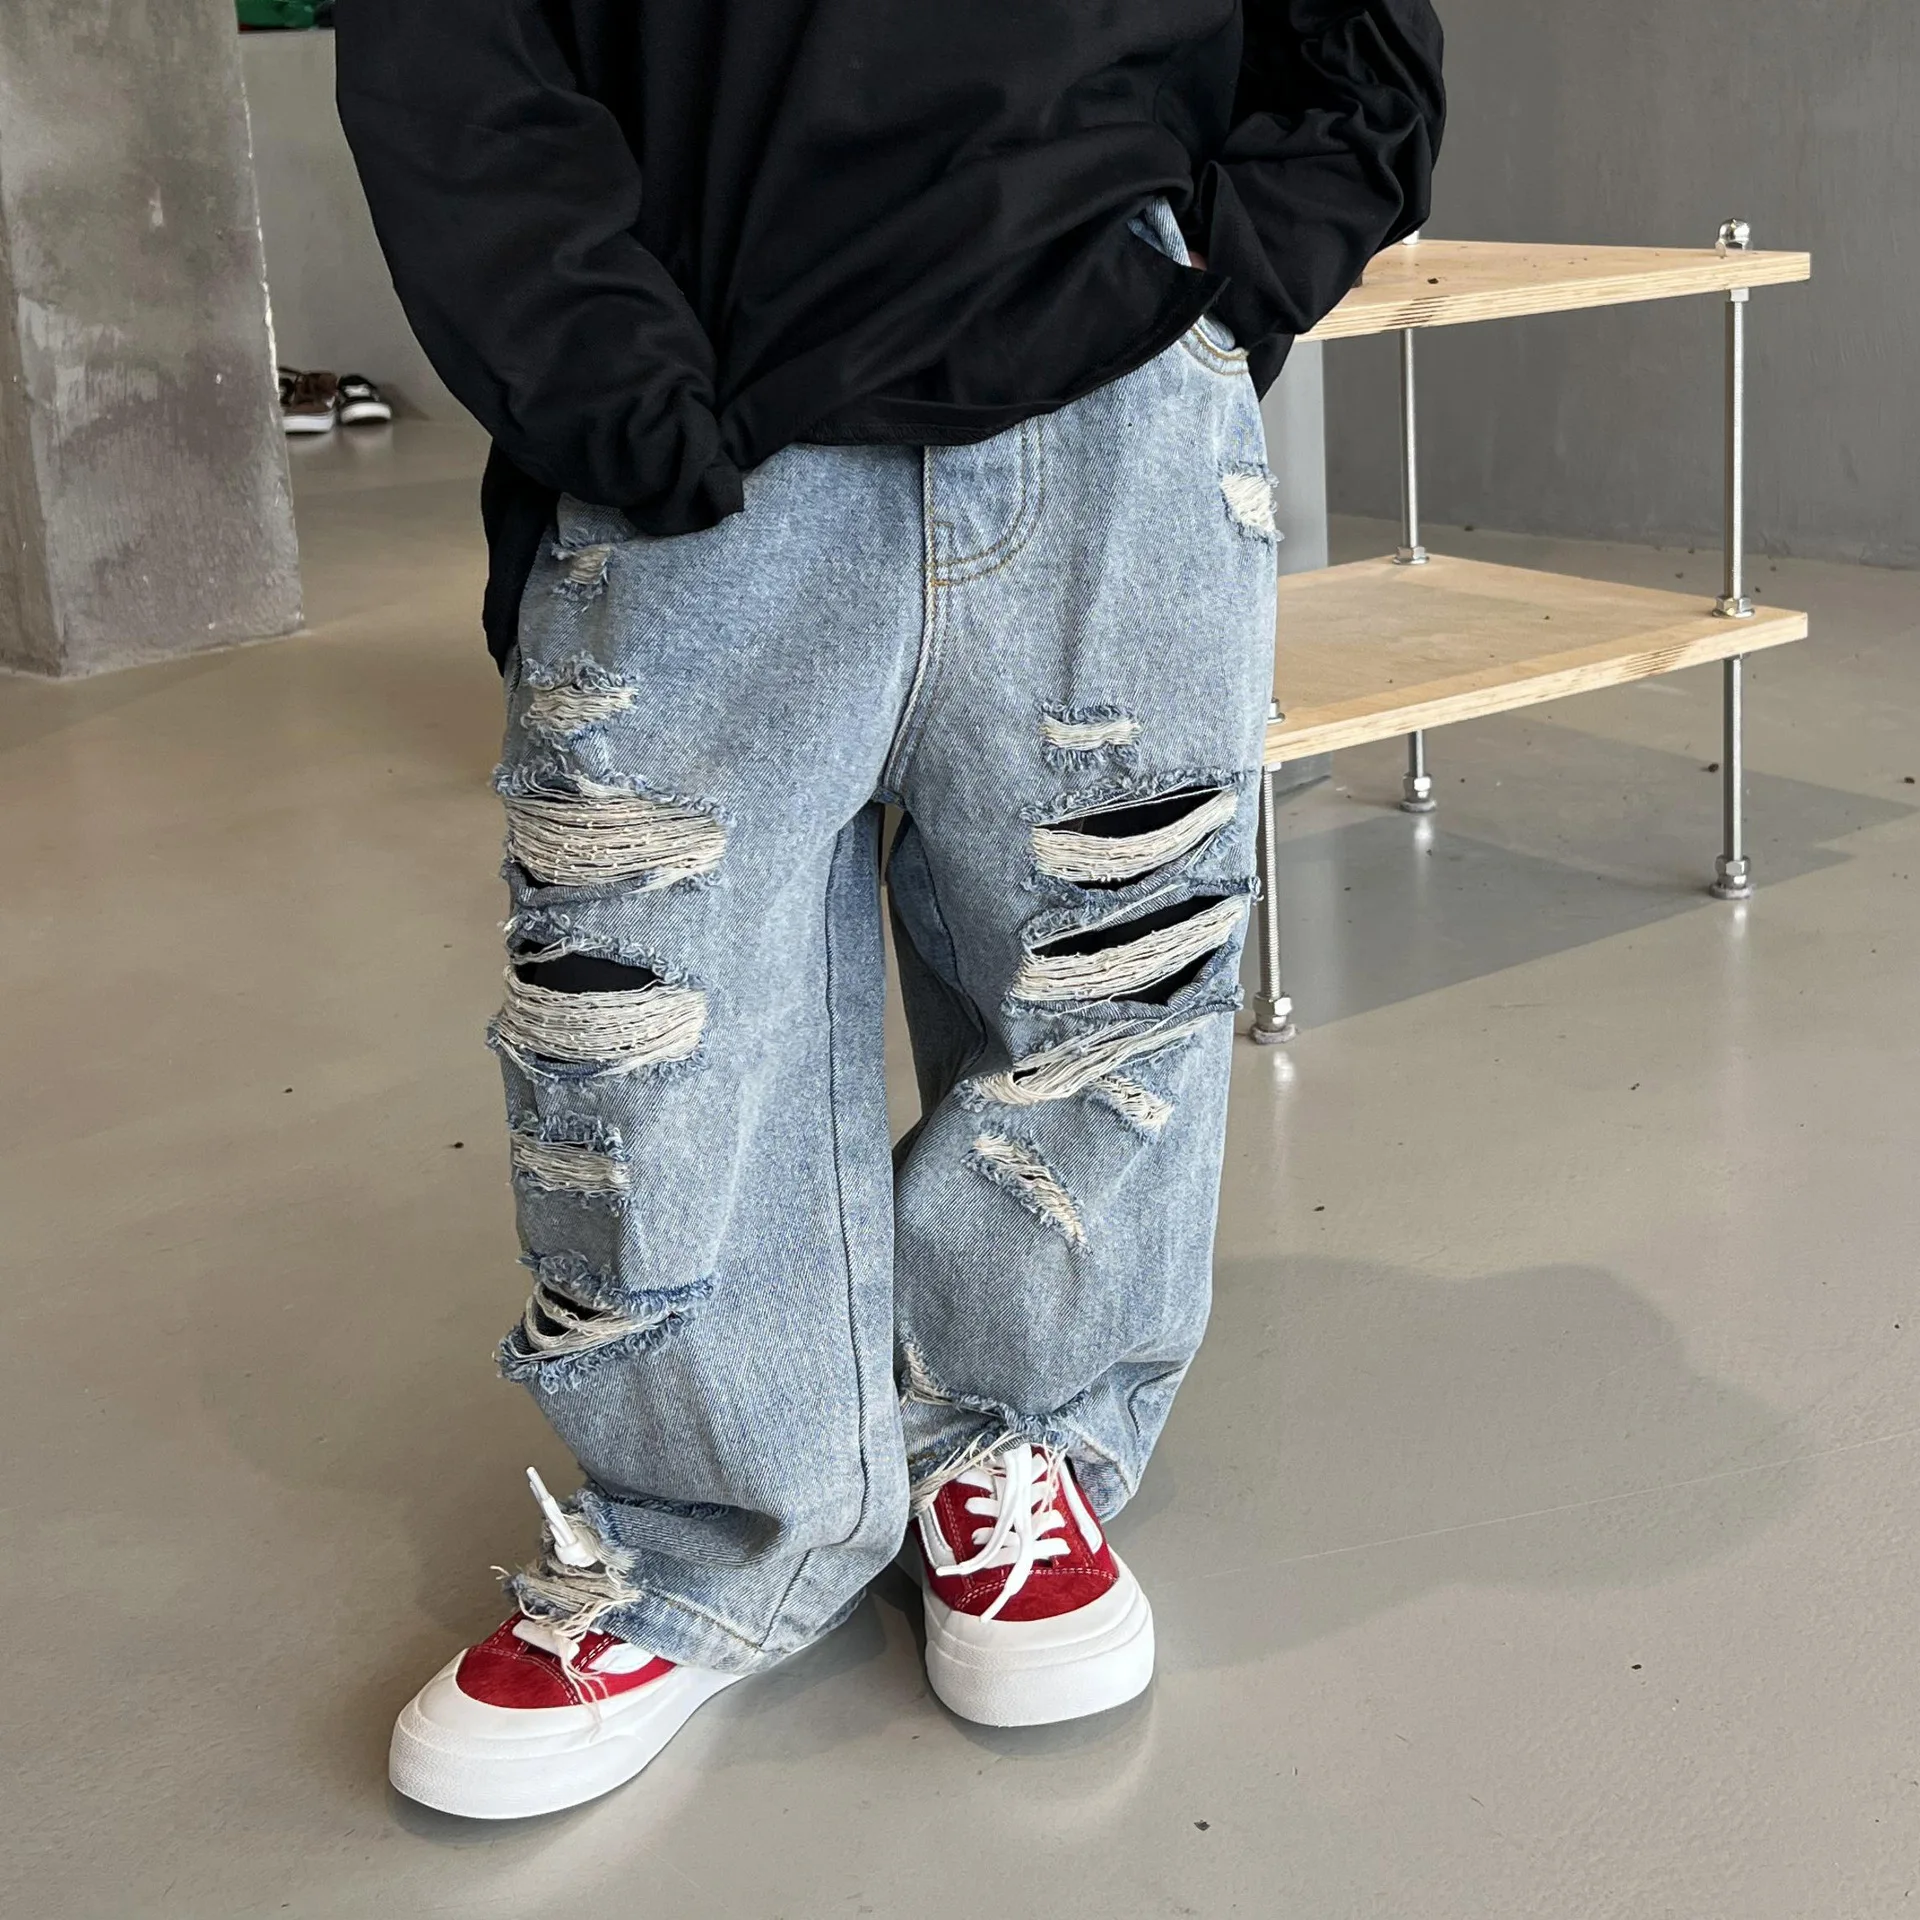 

2-8T Ripped Jeans for Boys Toddler Kid Baby Boy Clothes Loose Holes Infant Denim Pant Fashion Childrens Trousers Outfit